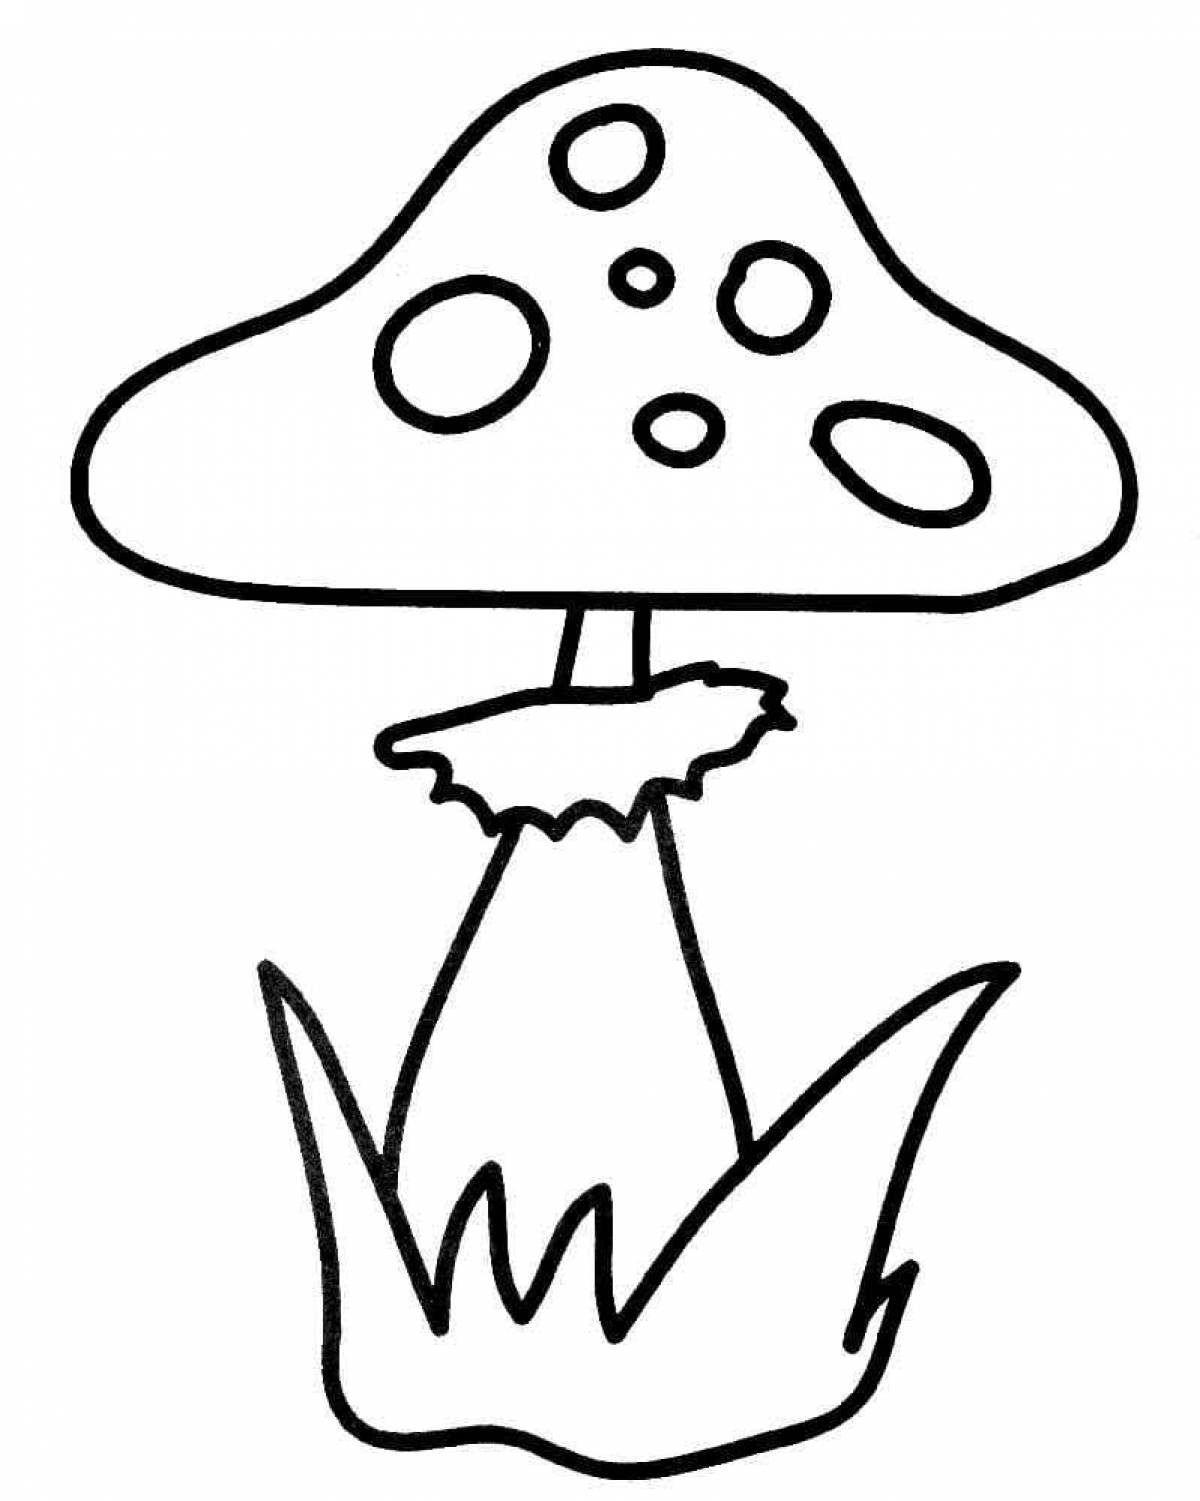 Adorable mushroom coloring page